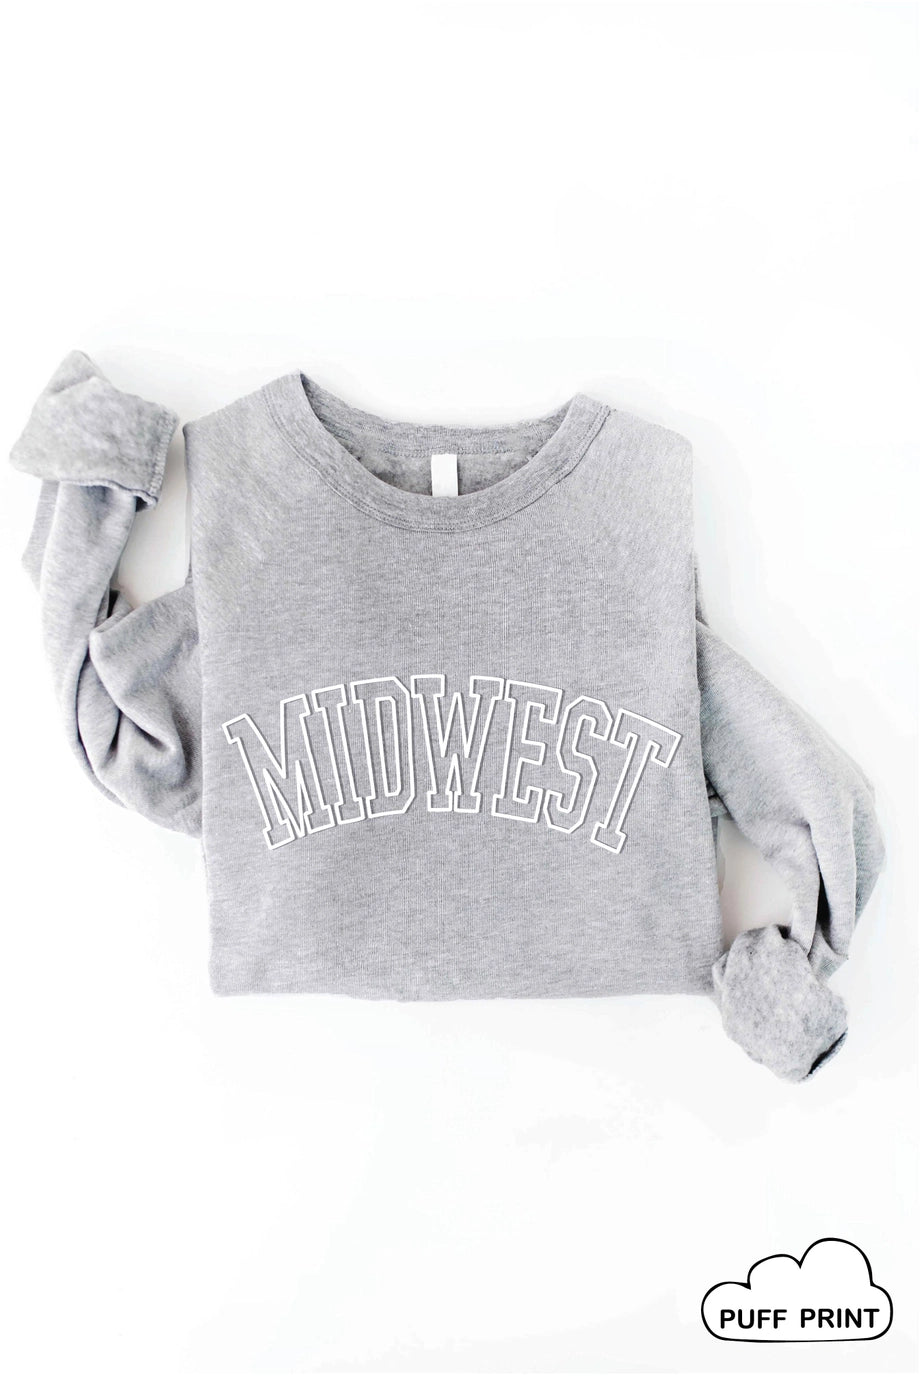 Midwest PUFF Graphic Sweatshirt - Athletic Heather